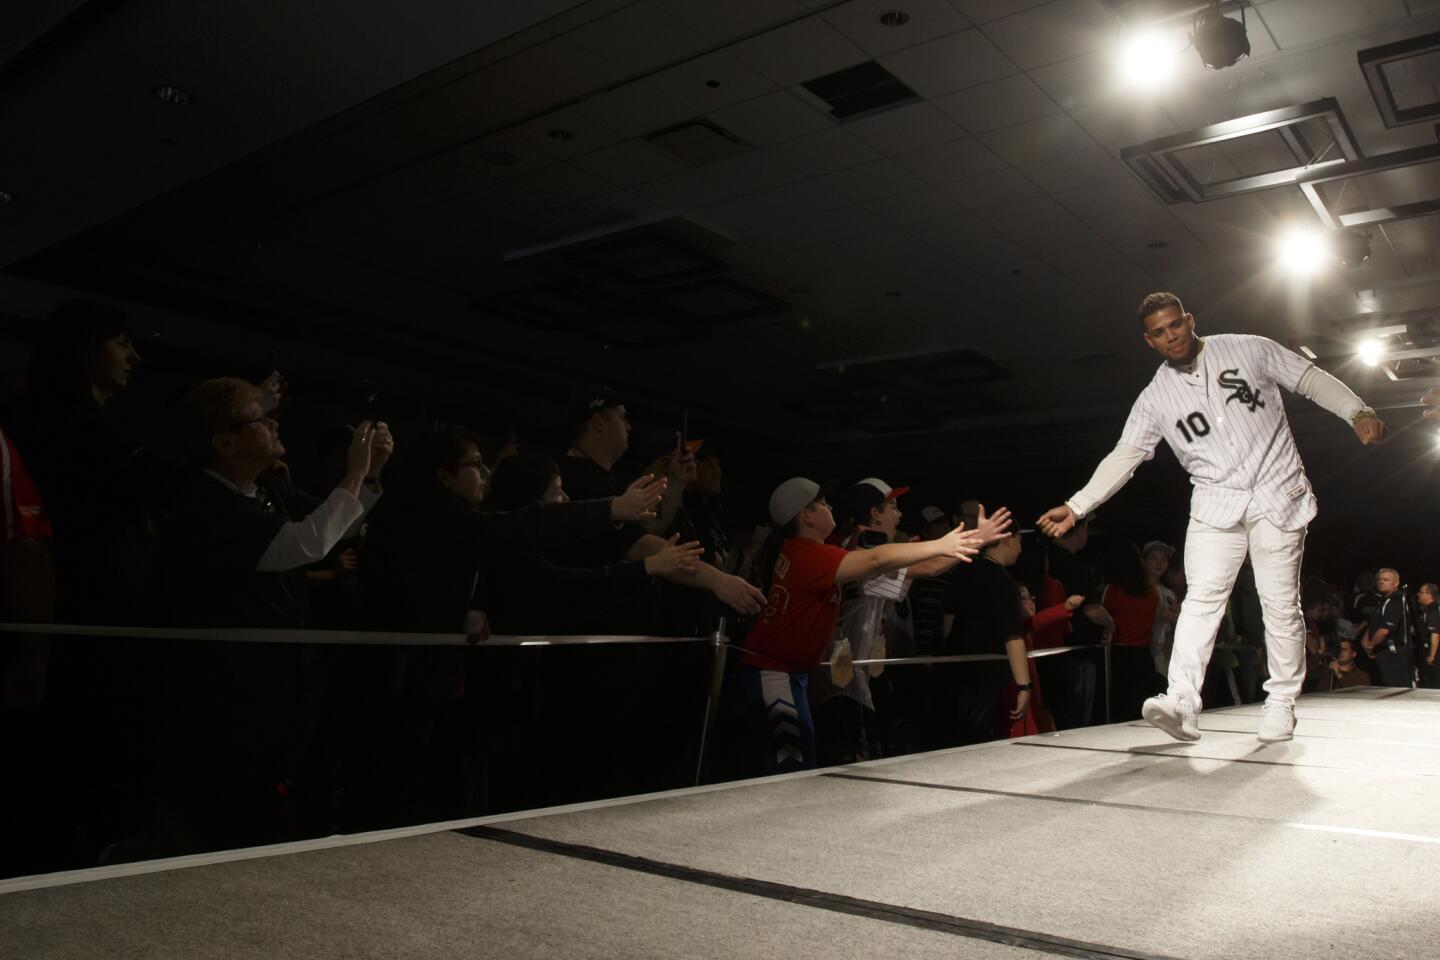 White Sox second baseman Yoan Moncada walks on stage during the opening ceremony of SoxFest 2018 at the Hilton Chicago on Friday, Jan. 26, 2018.